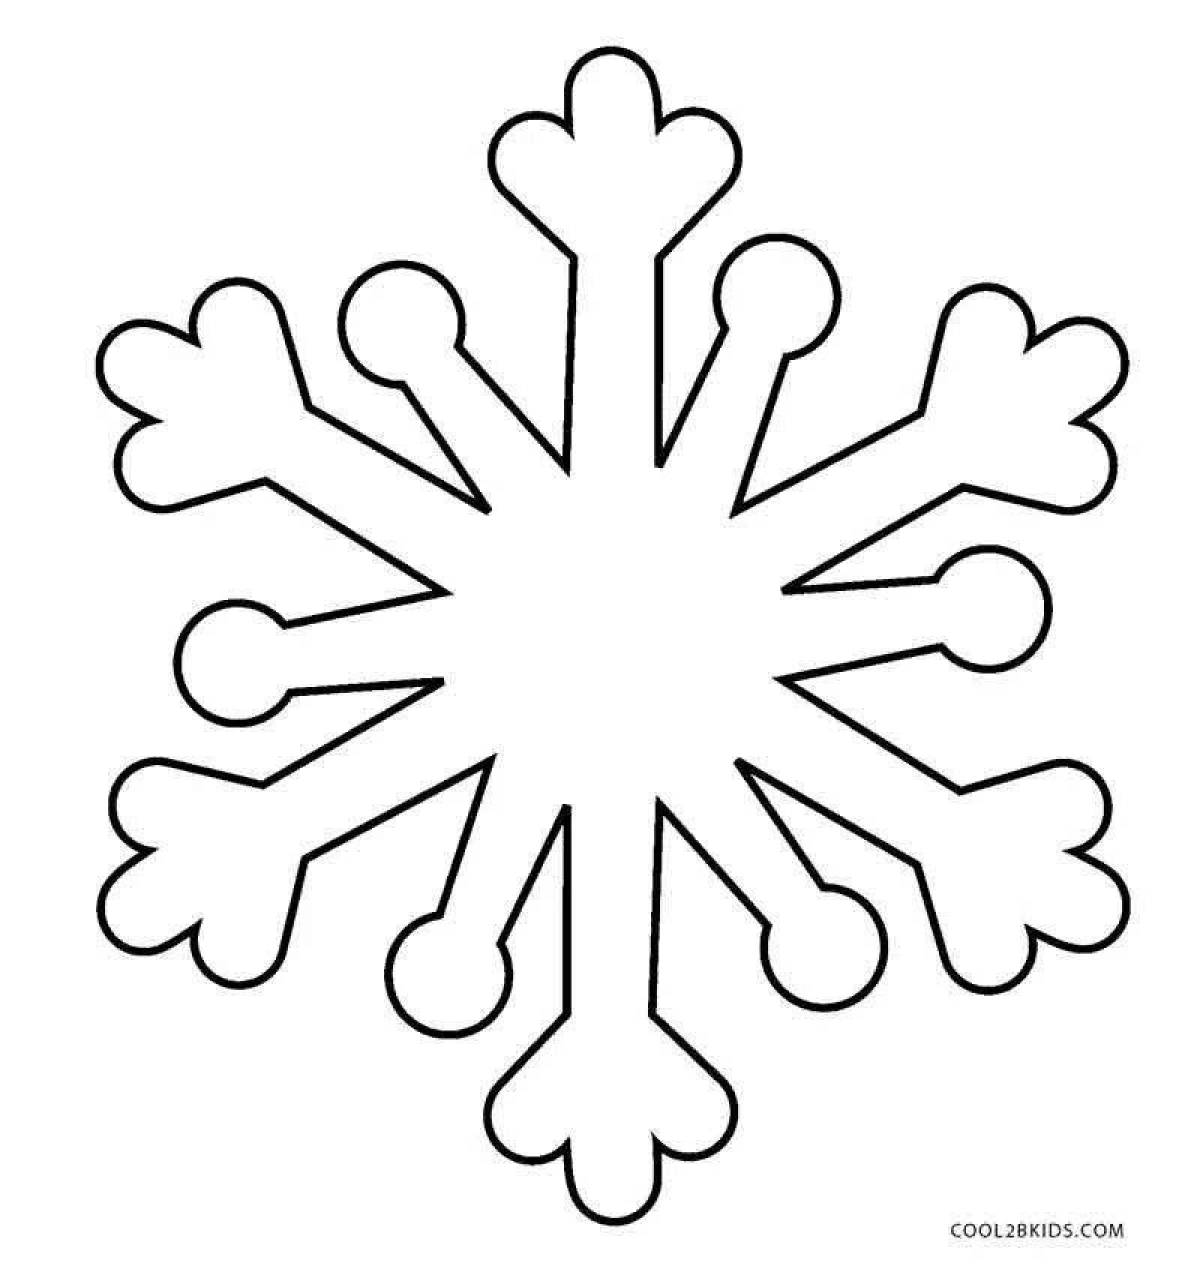 Whimsical snowflake coloring book for 4-5 year olds